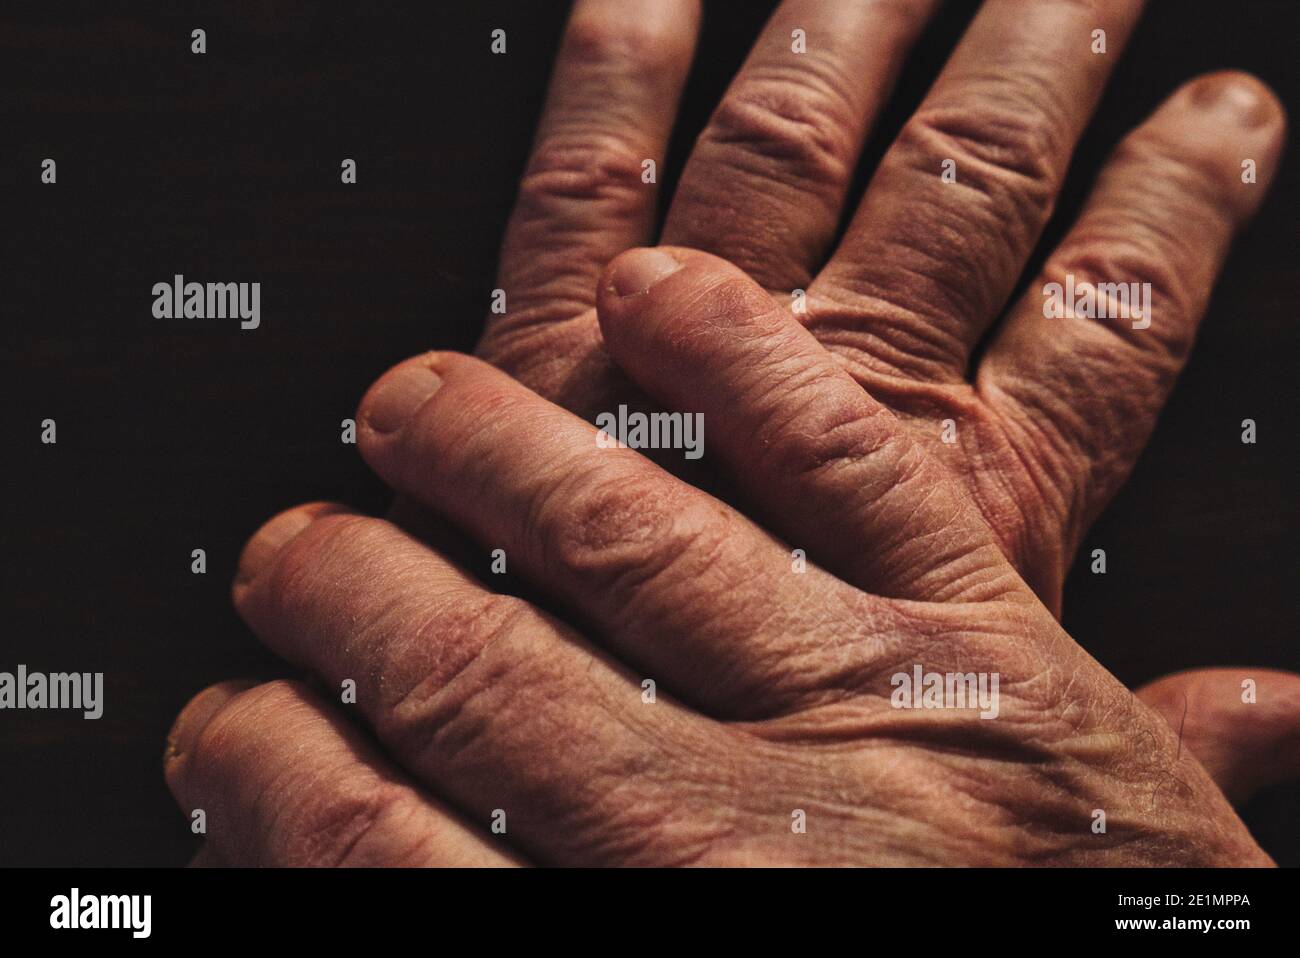 Wrinkled hands of old man on top of each other. Close up. High angle view. Stock Photo